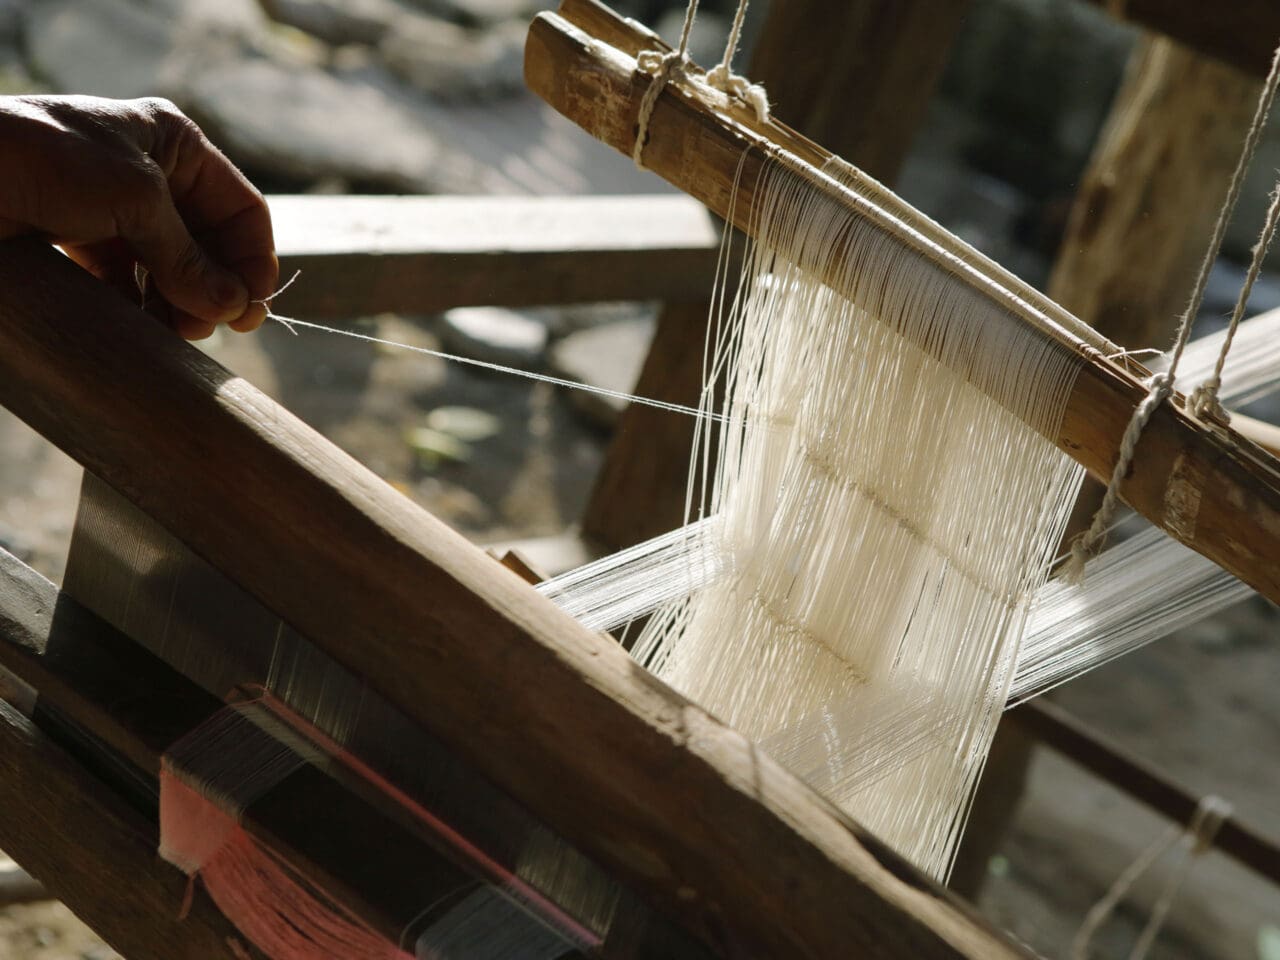 A weaver setting up a traditional floor loom